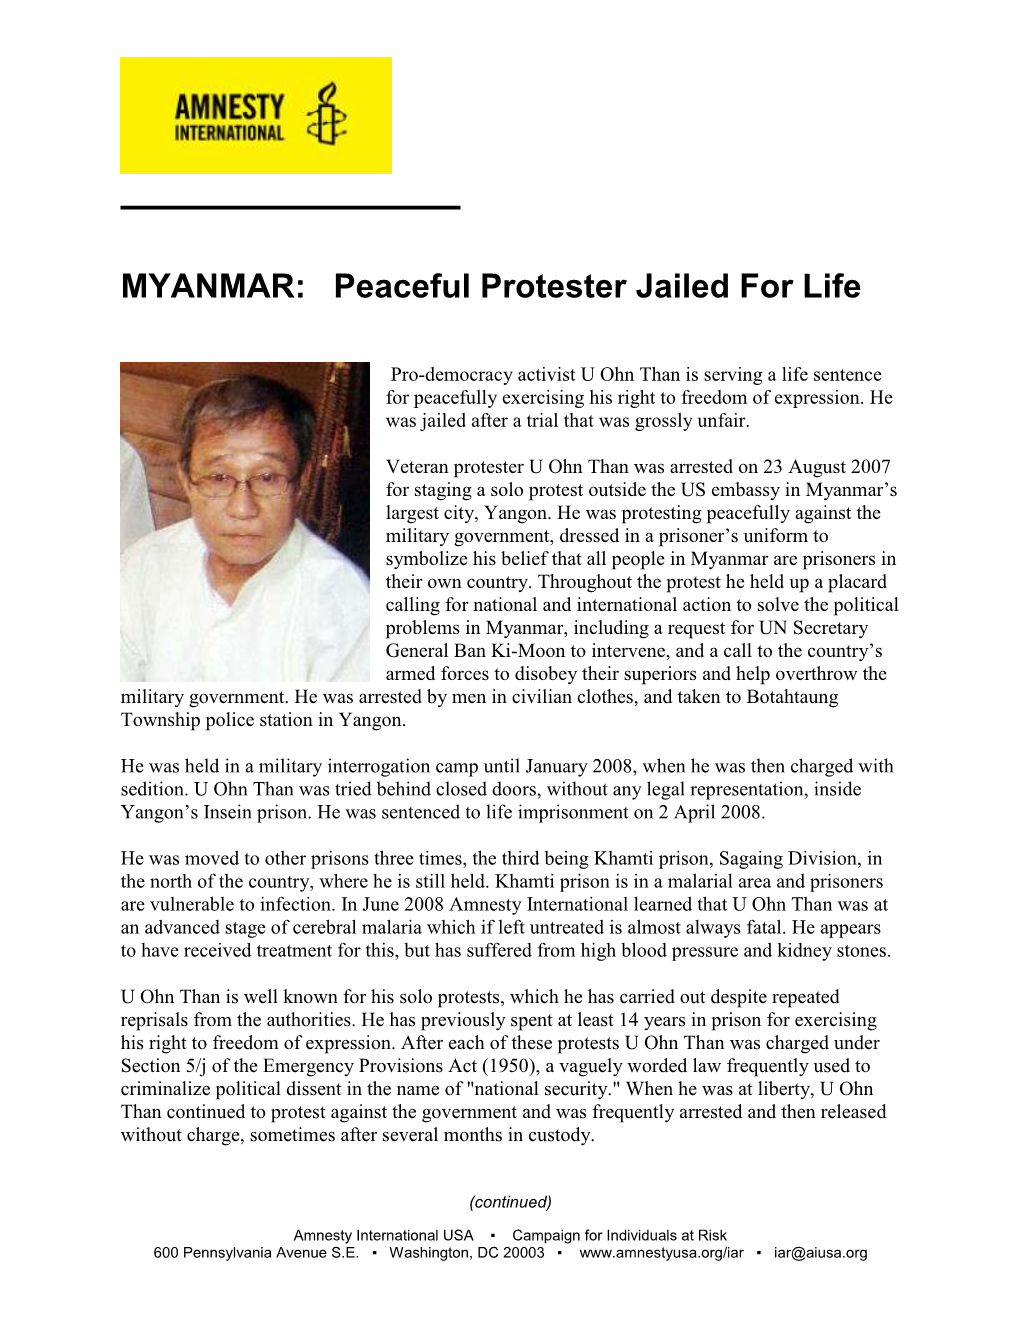 MYANMAR: Peaceful Protester Jailed for Life